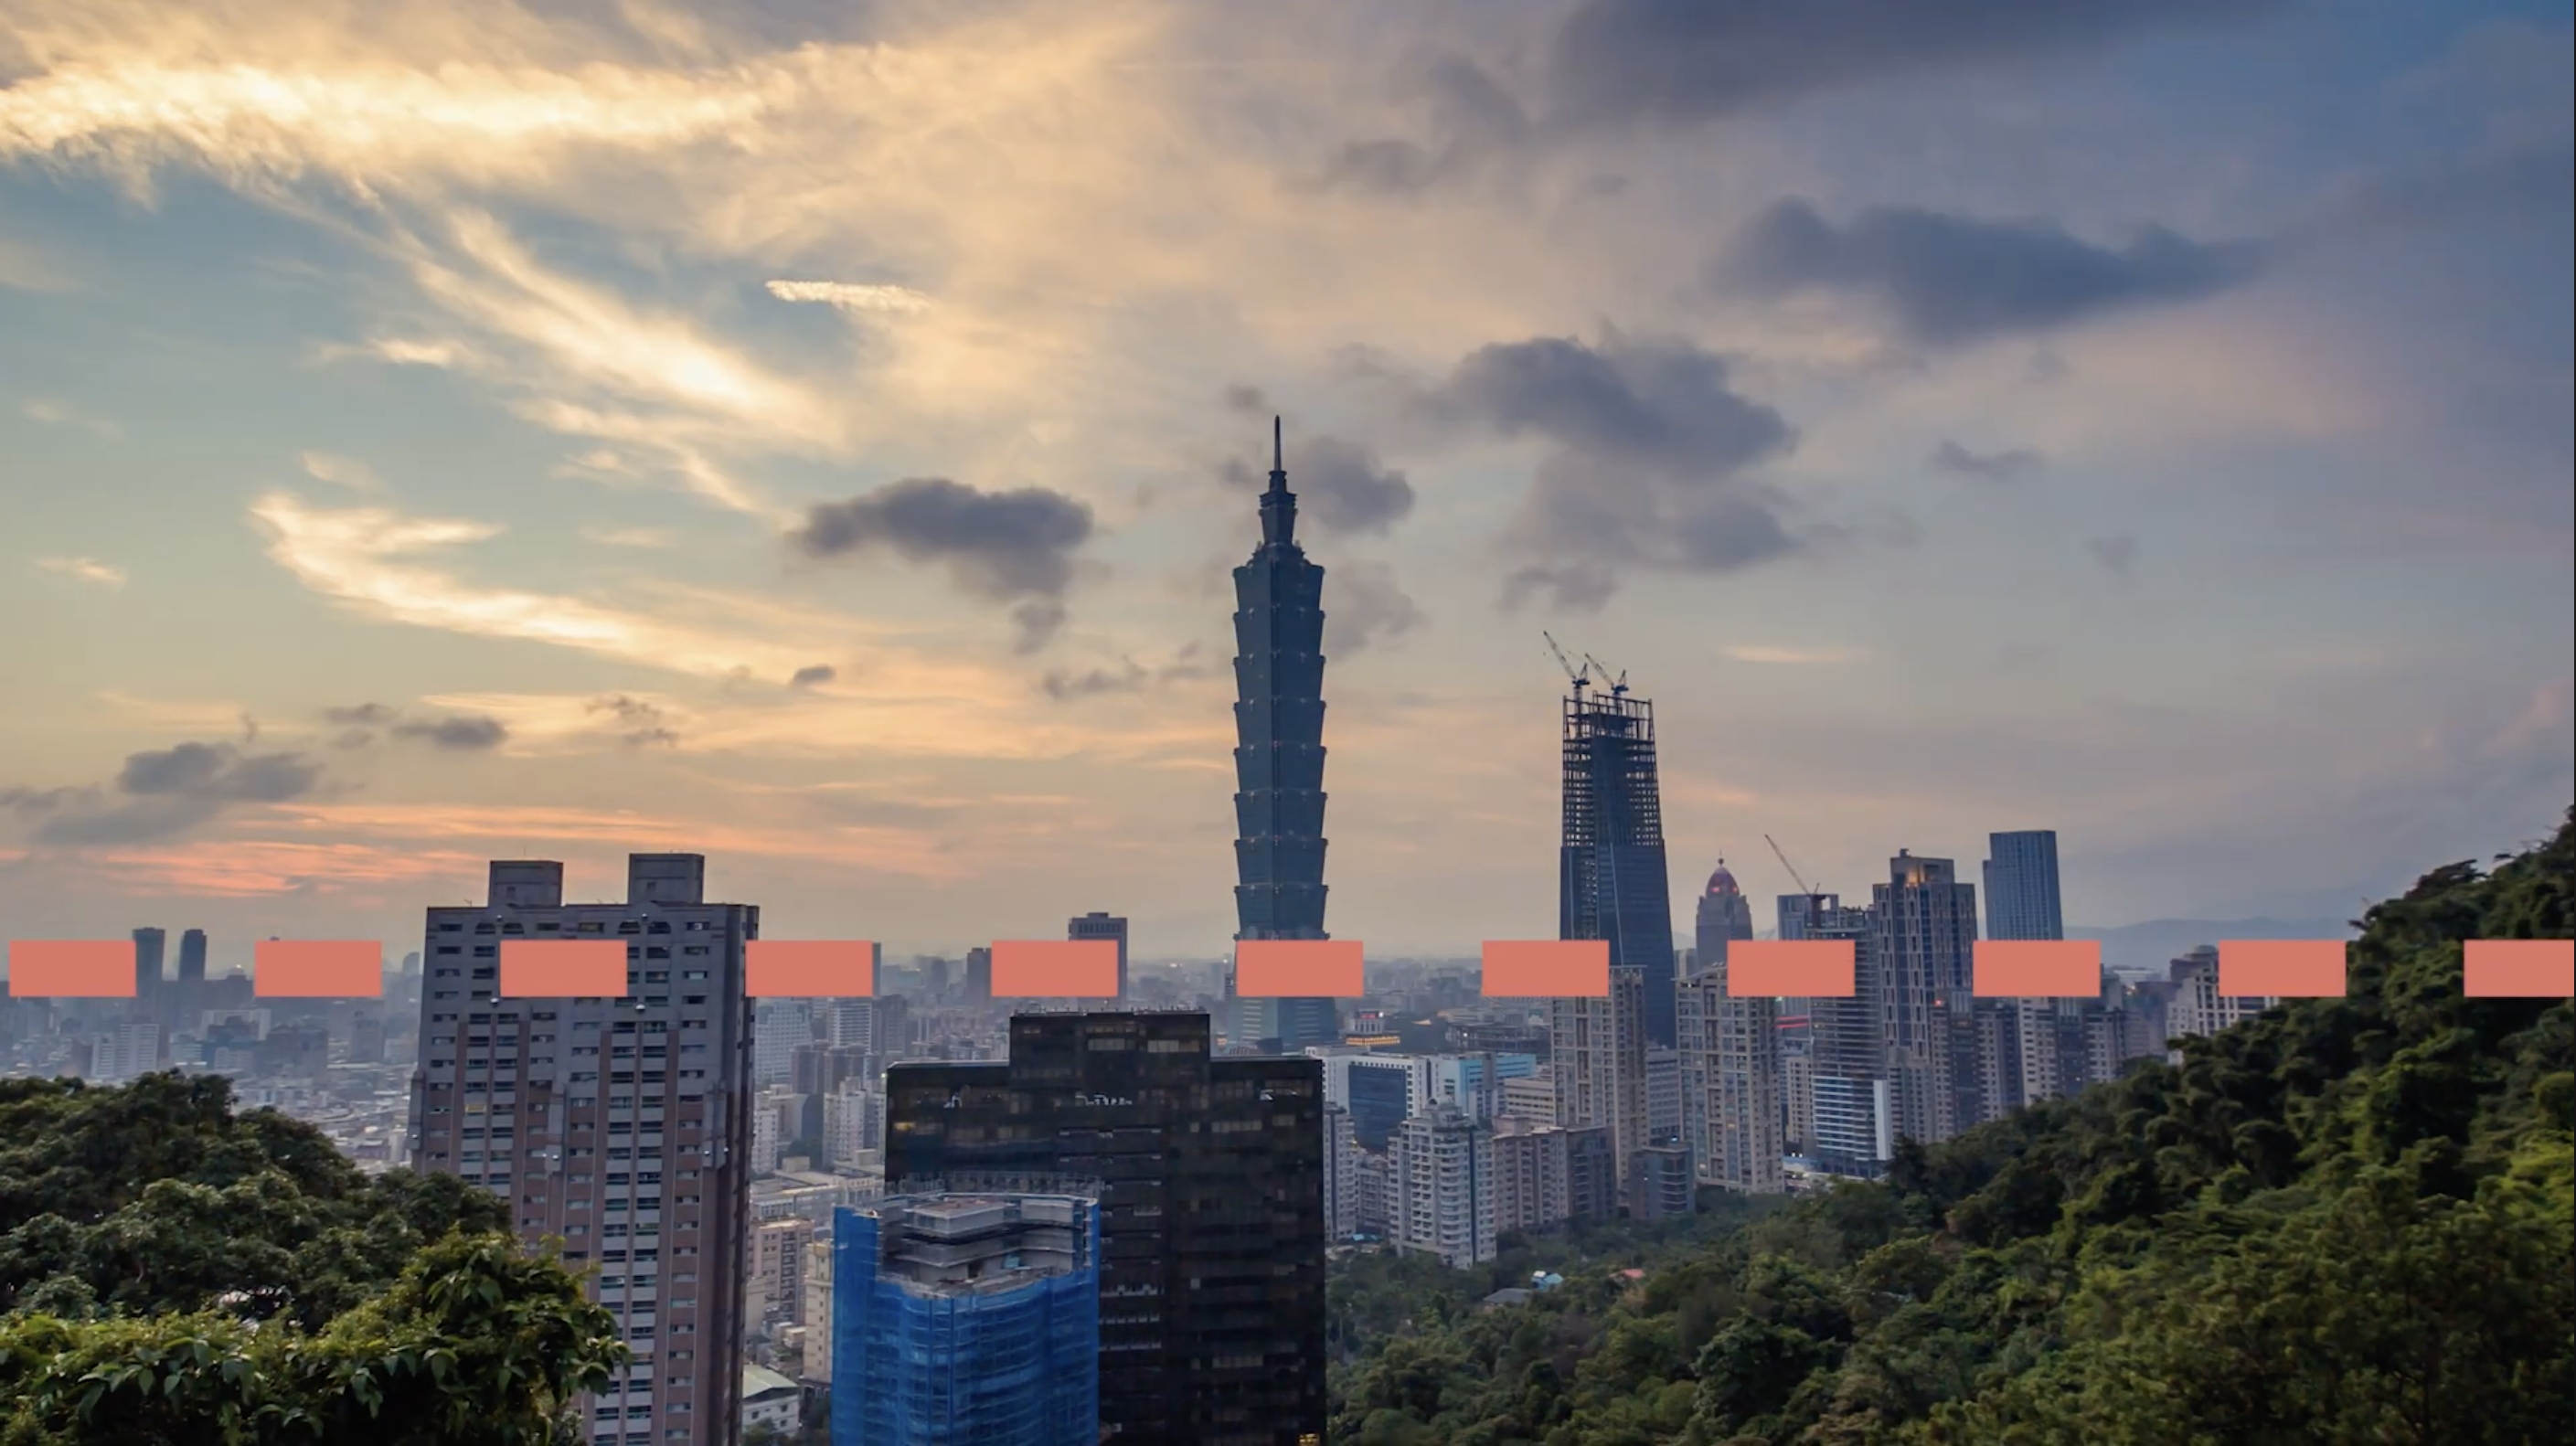 The Skyline in Taipei, Taiwan during Sunset using a dashed line to indicate good composition rules for a time lapse or hyperlapse.